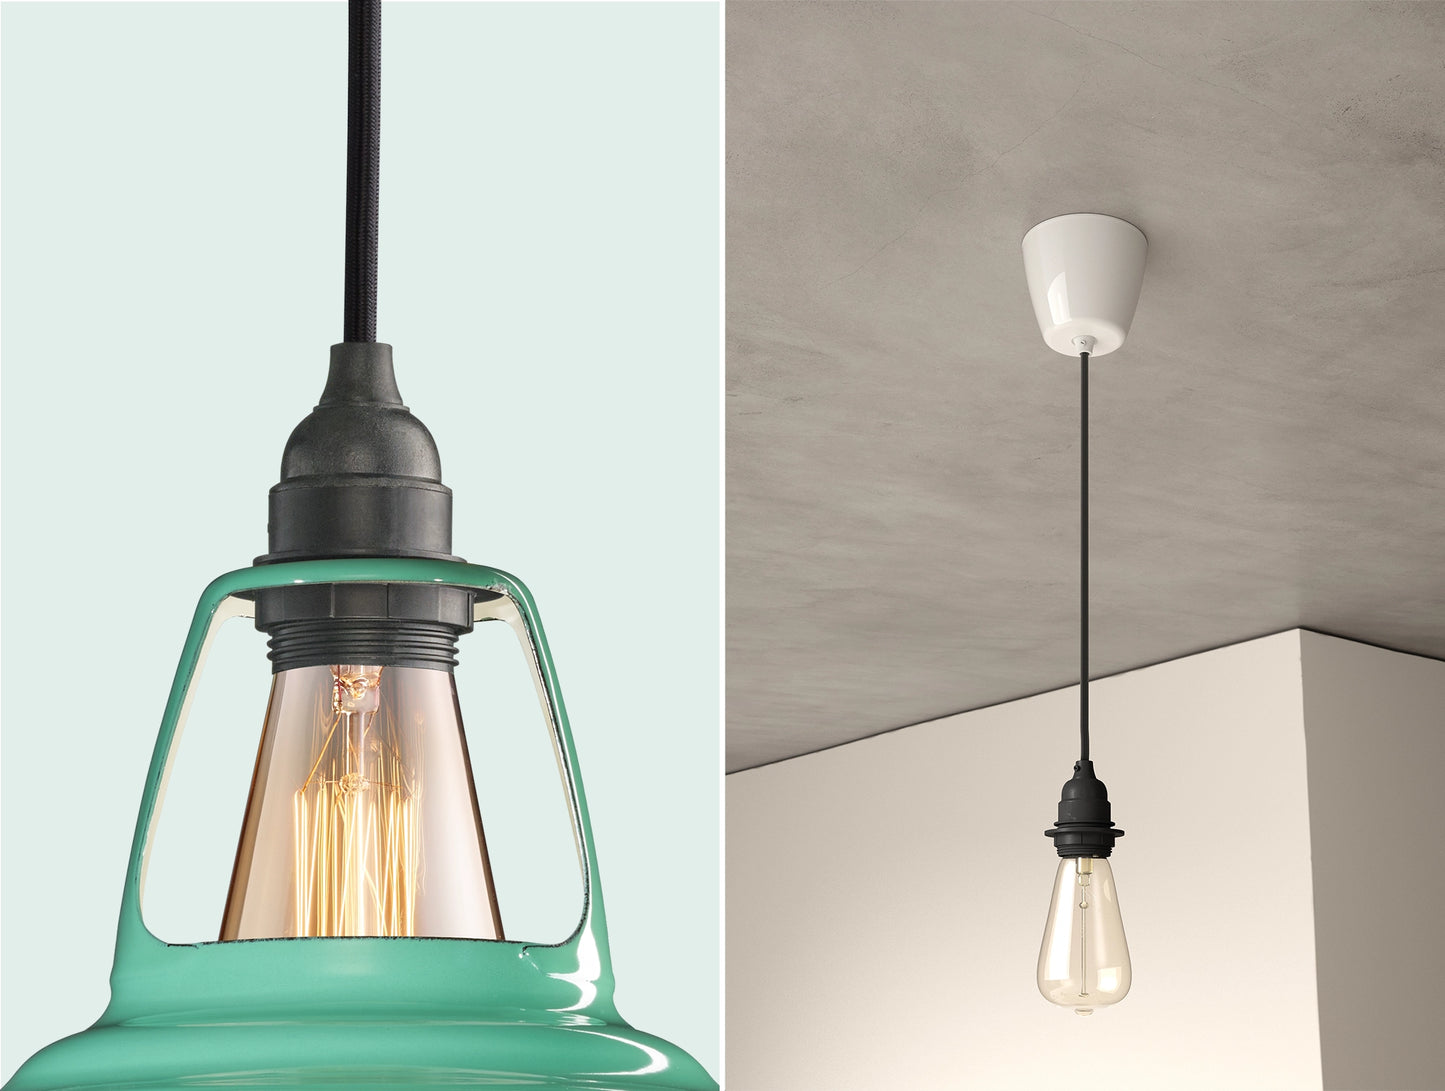 Close up of an E27 Industrial suspension set on a Fresh Teal lampshade on the left. On the right, an E27 Industrial pendant set with a lightbulb is hanging from the ceiling